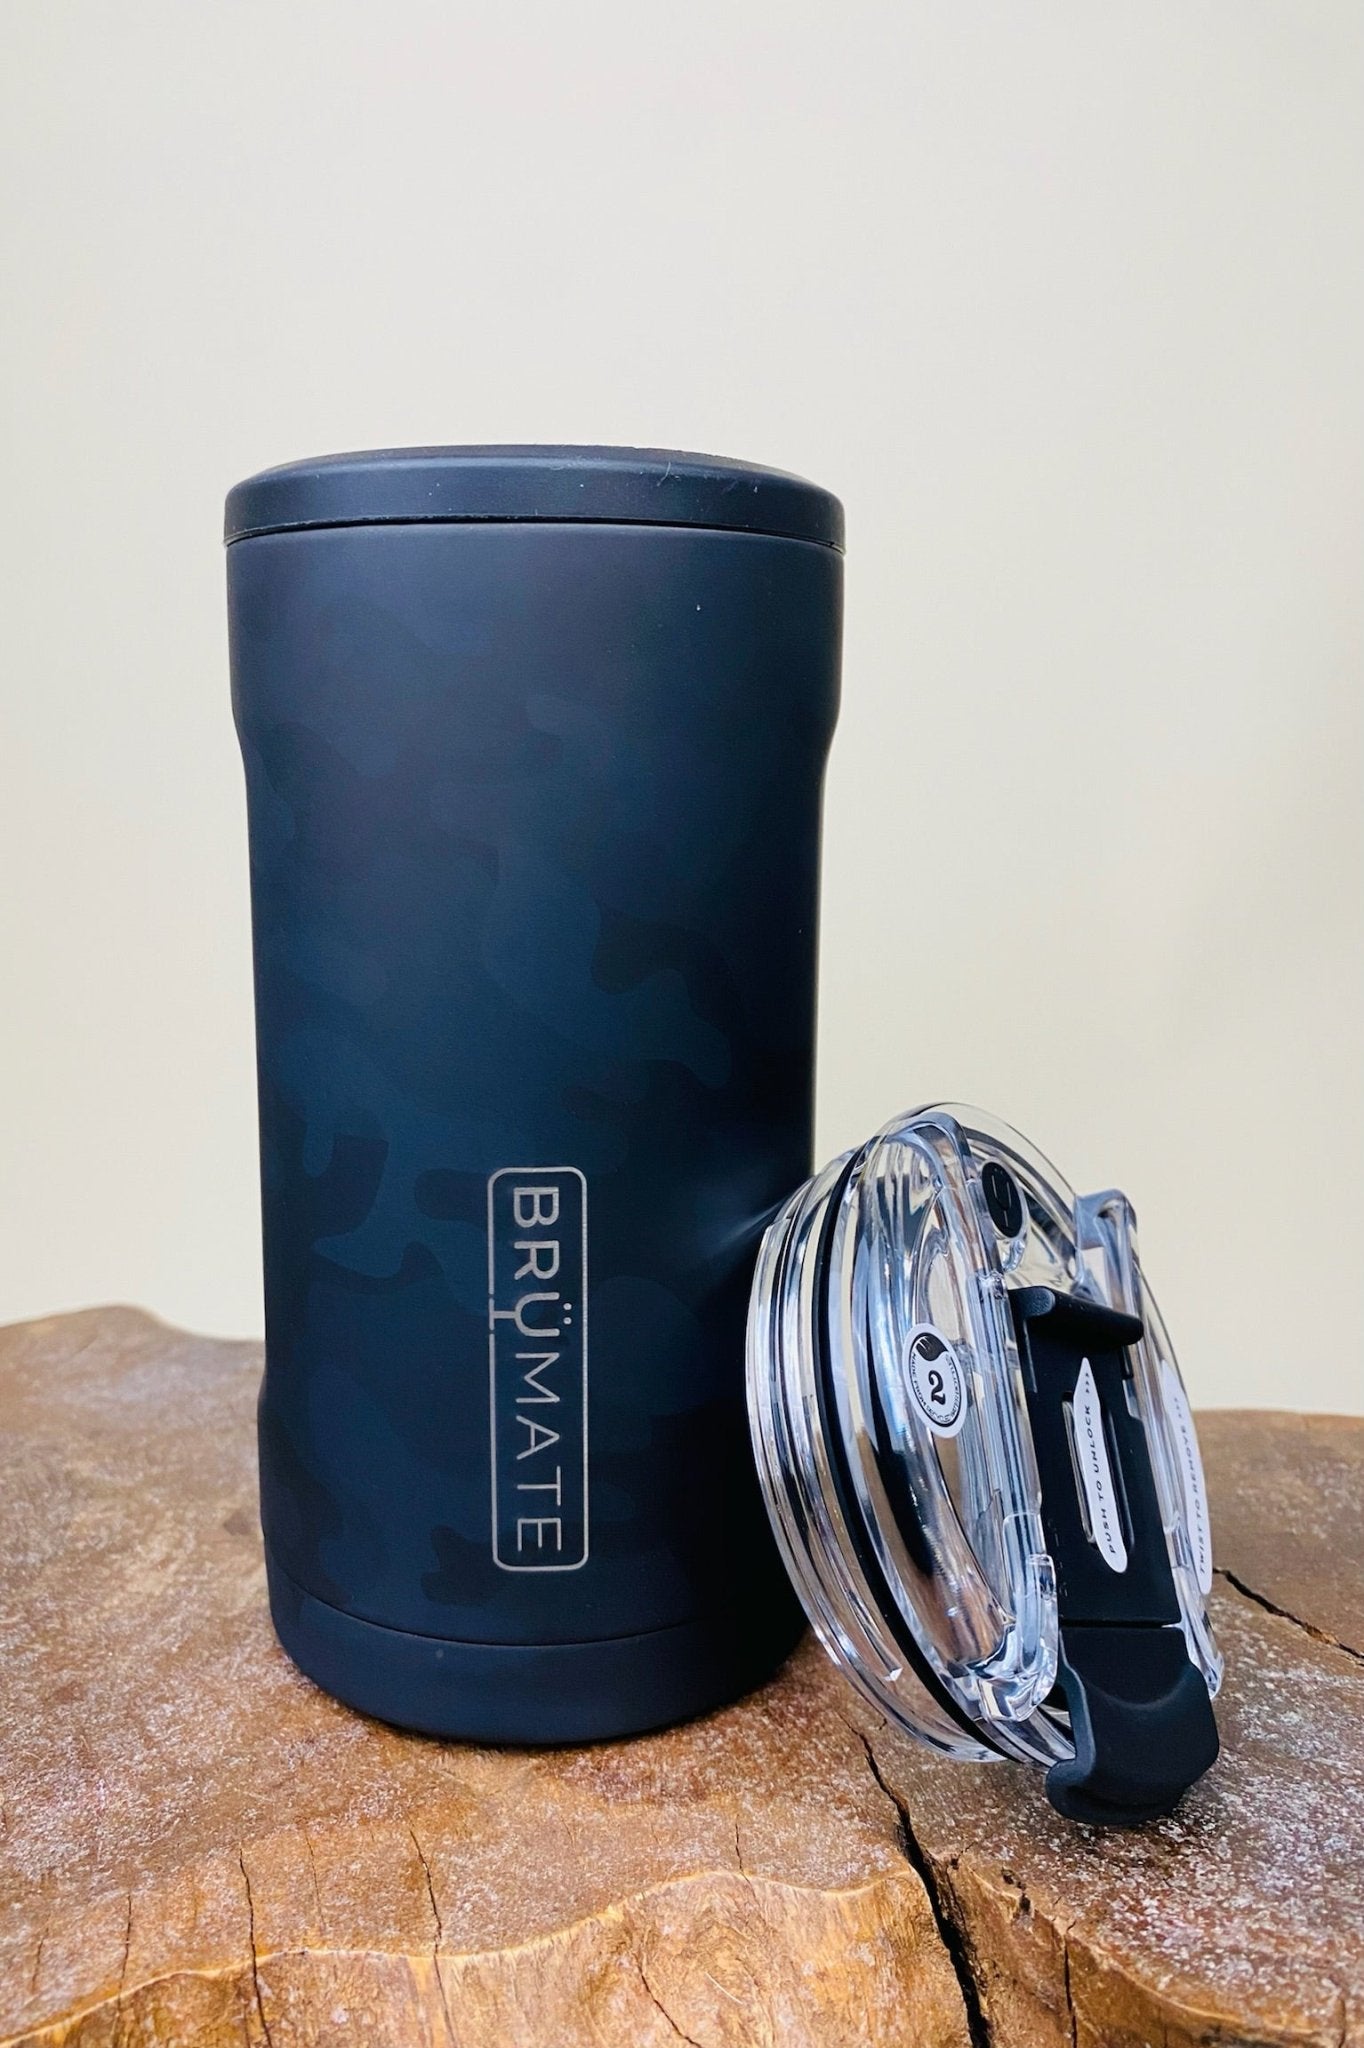 BruMate hopsulator trio 3 in 1 black camo - BruMate Drinkware, Tumblers and Insulated Can Coolers at Lush Fashion Lounge Trendy Boutique in Oklahoma City